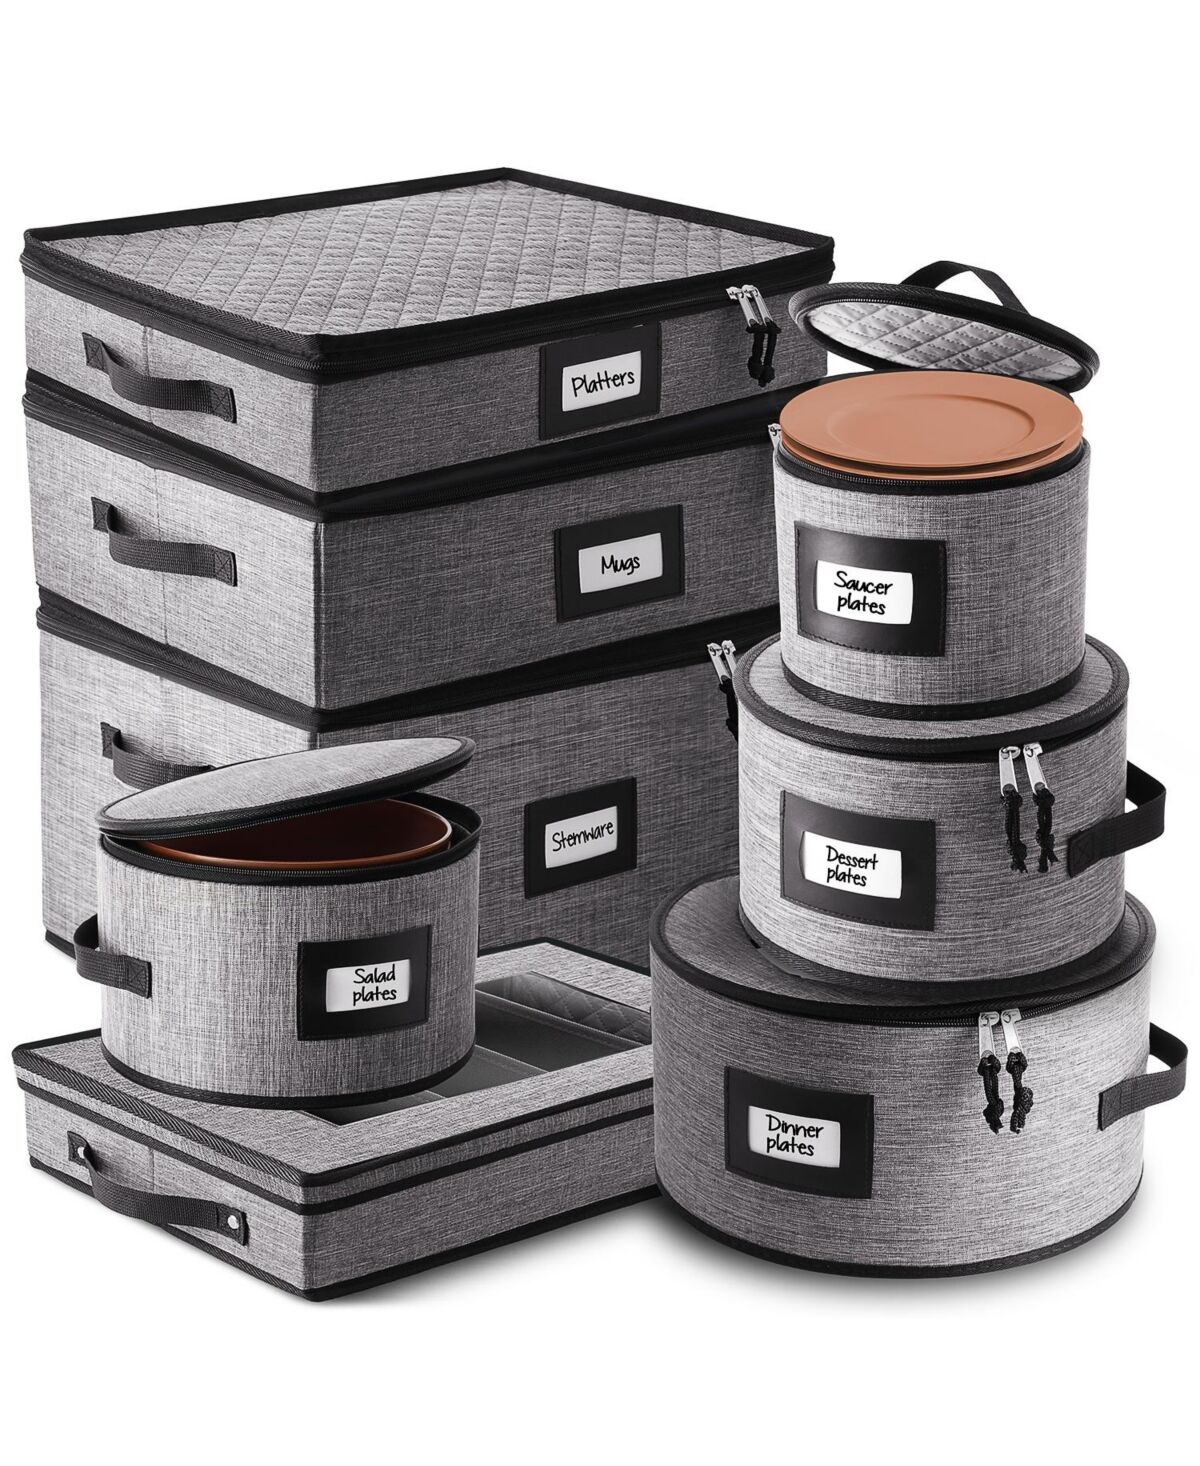 Storagebud 8 Piece Hard Shell Complete Dinnerware Storage set - Holds 12 Servings of Plates, cups, Platters, stemware and cutlery - Grey  black